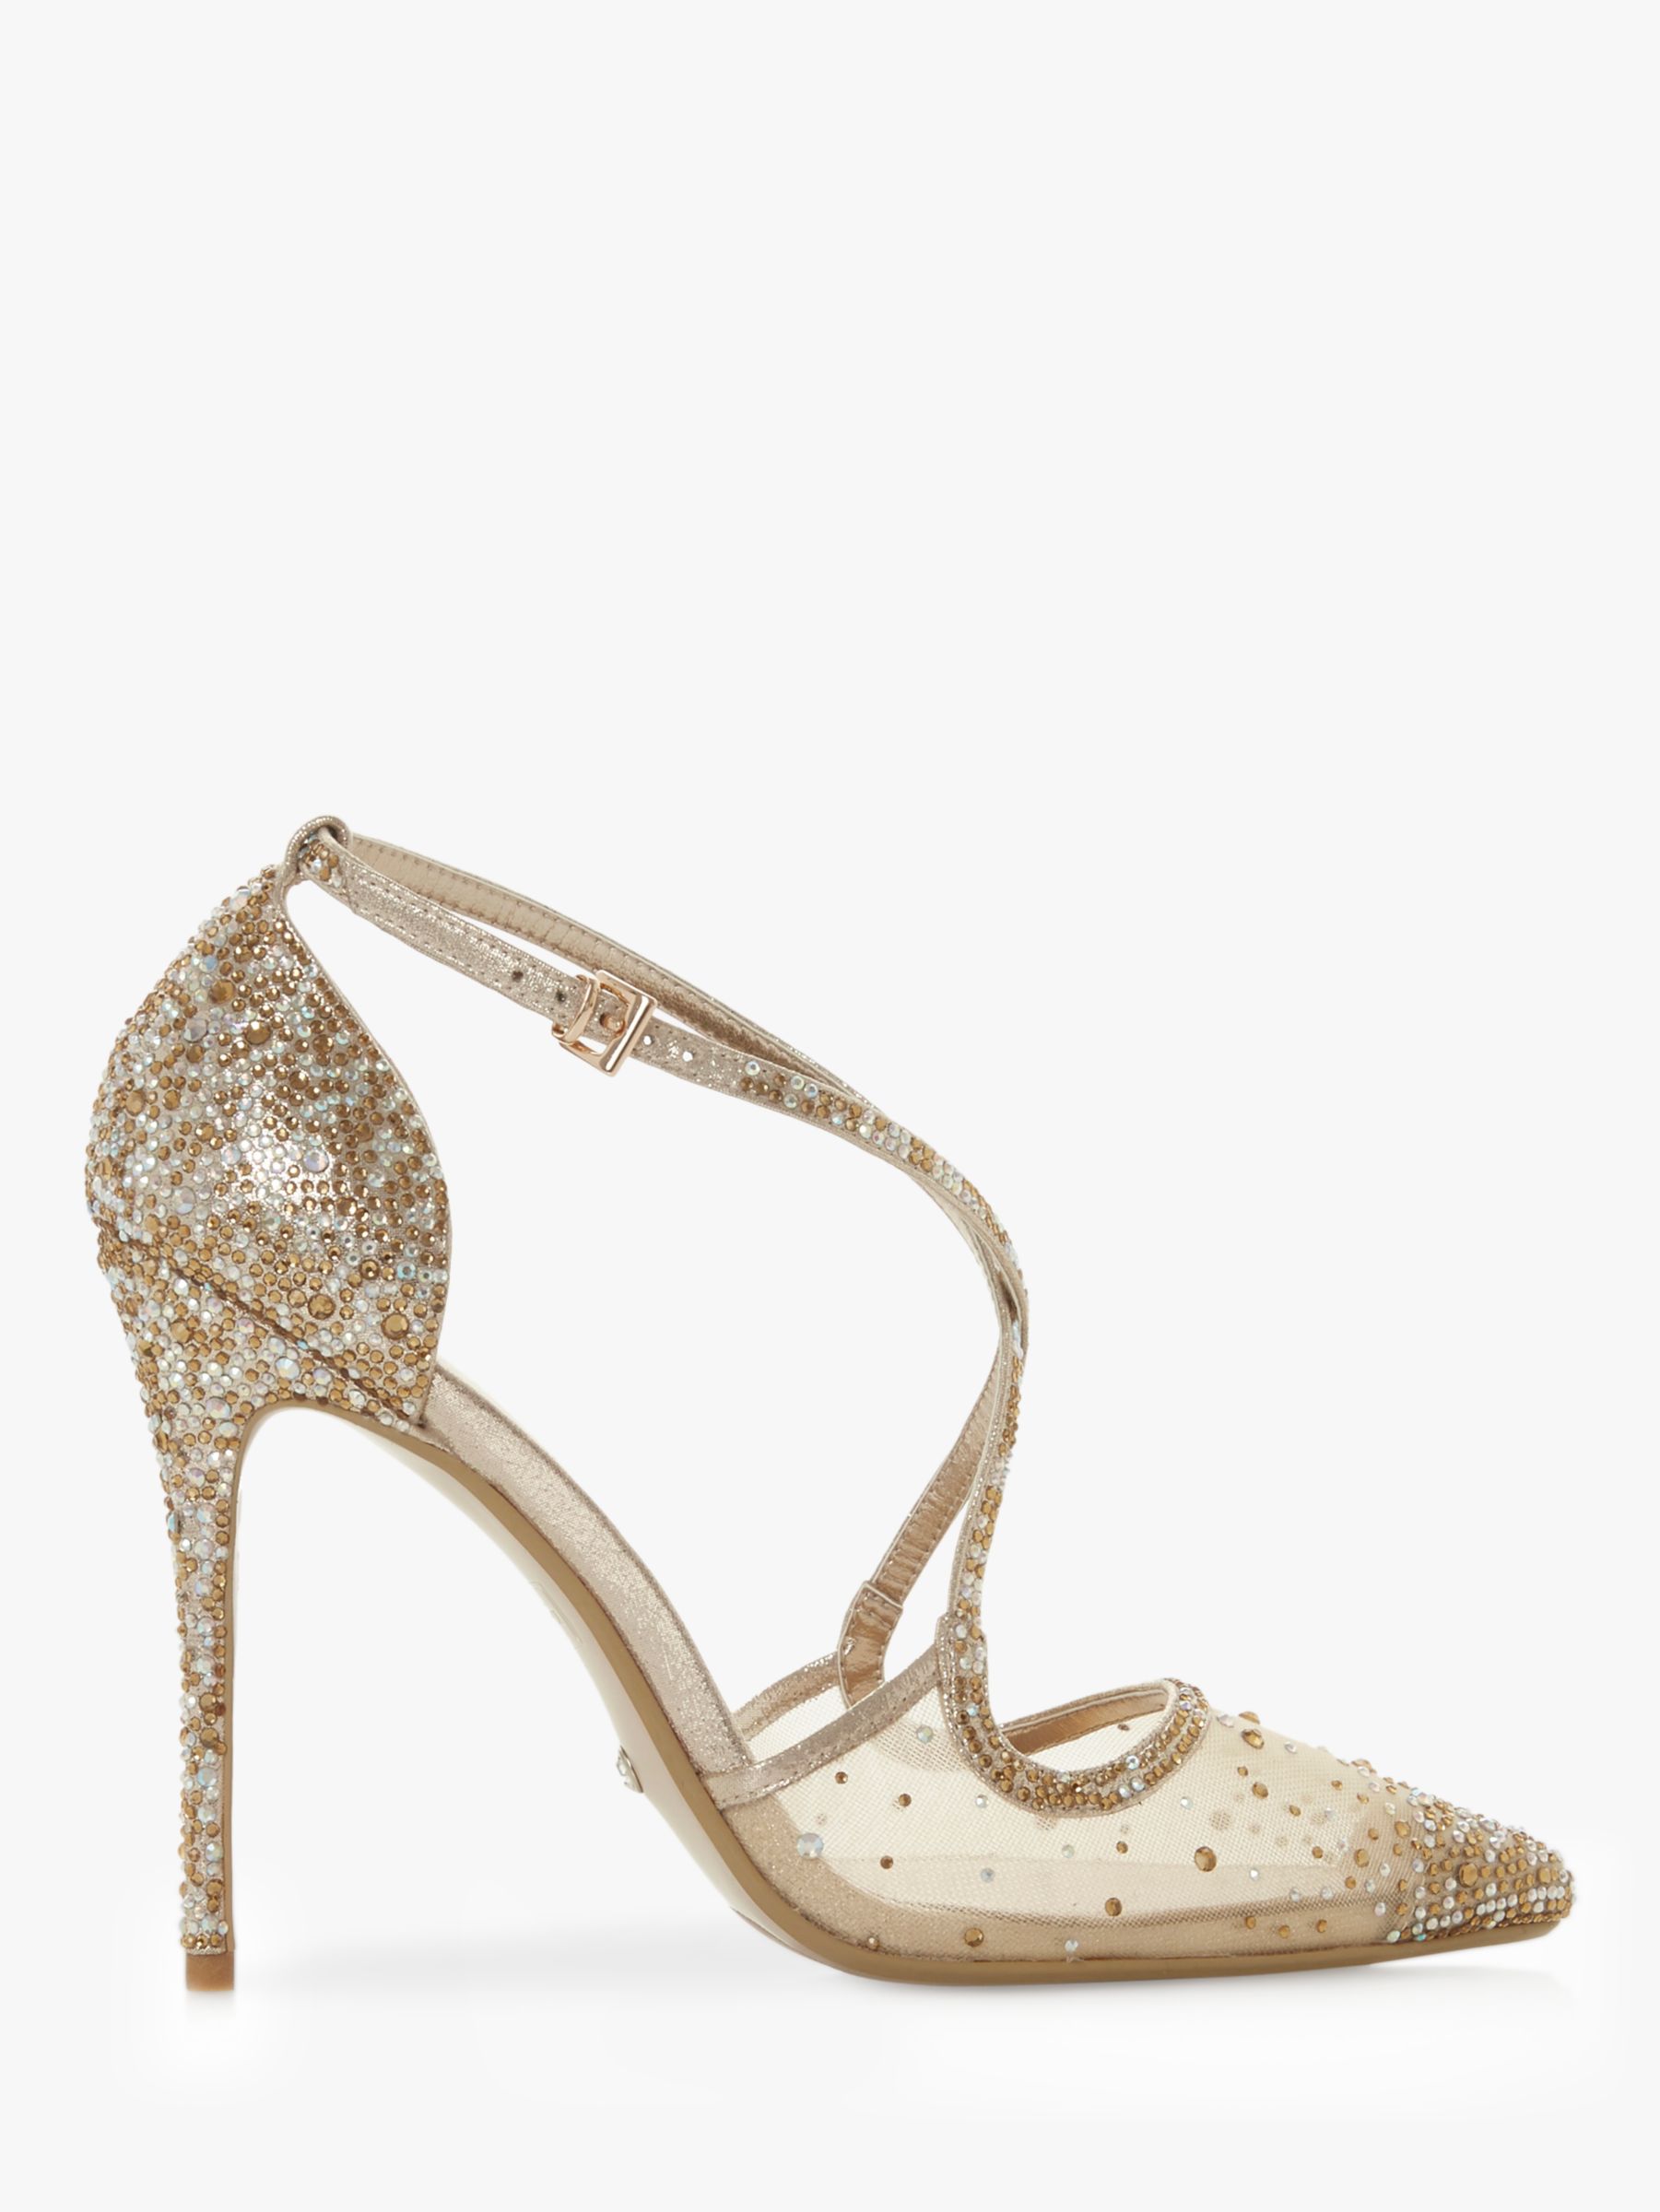 Dune Darhling Diamante Embellished Pointed Toe Court Shoes, Gold